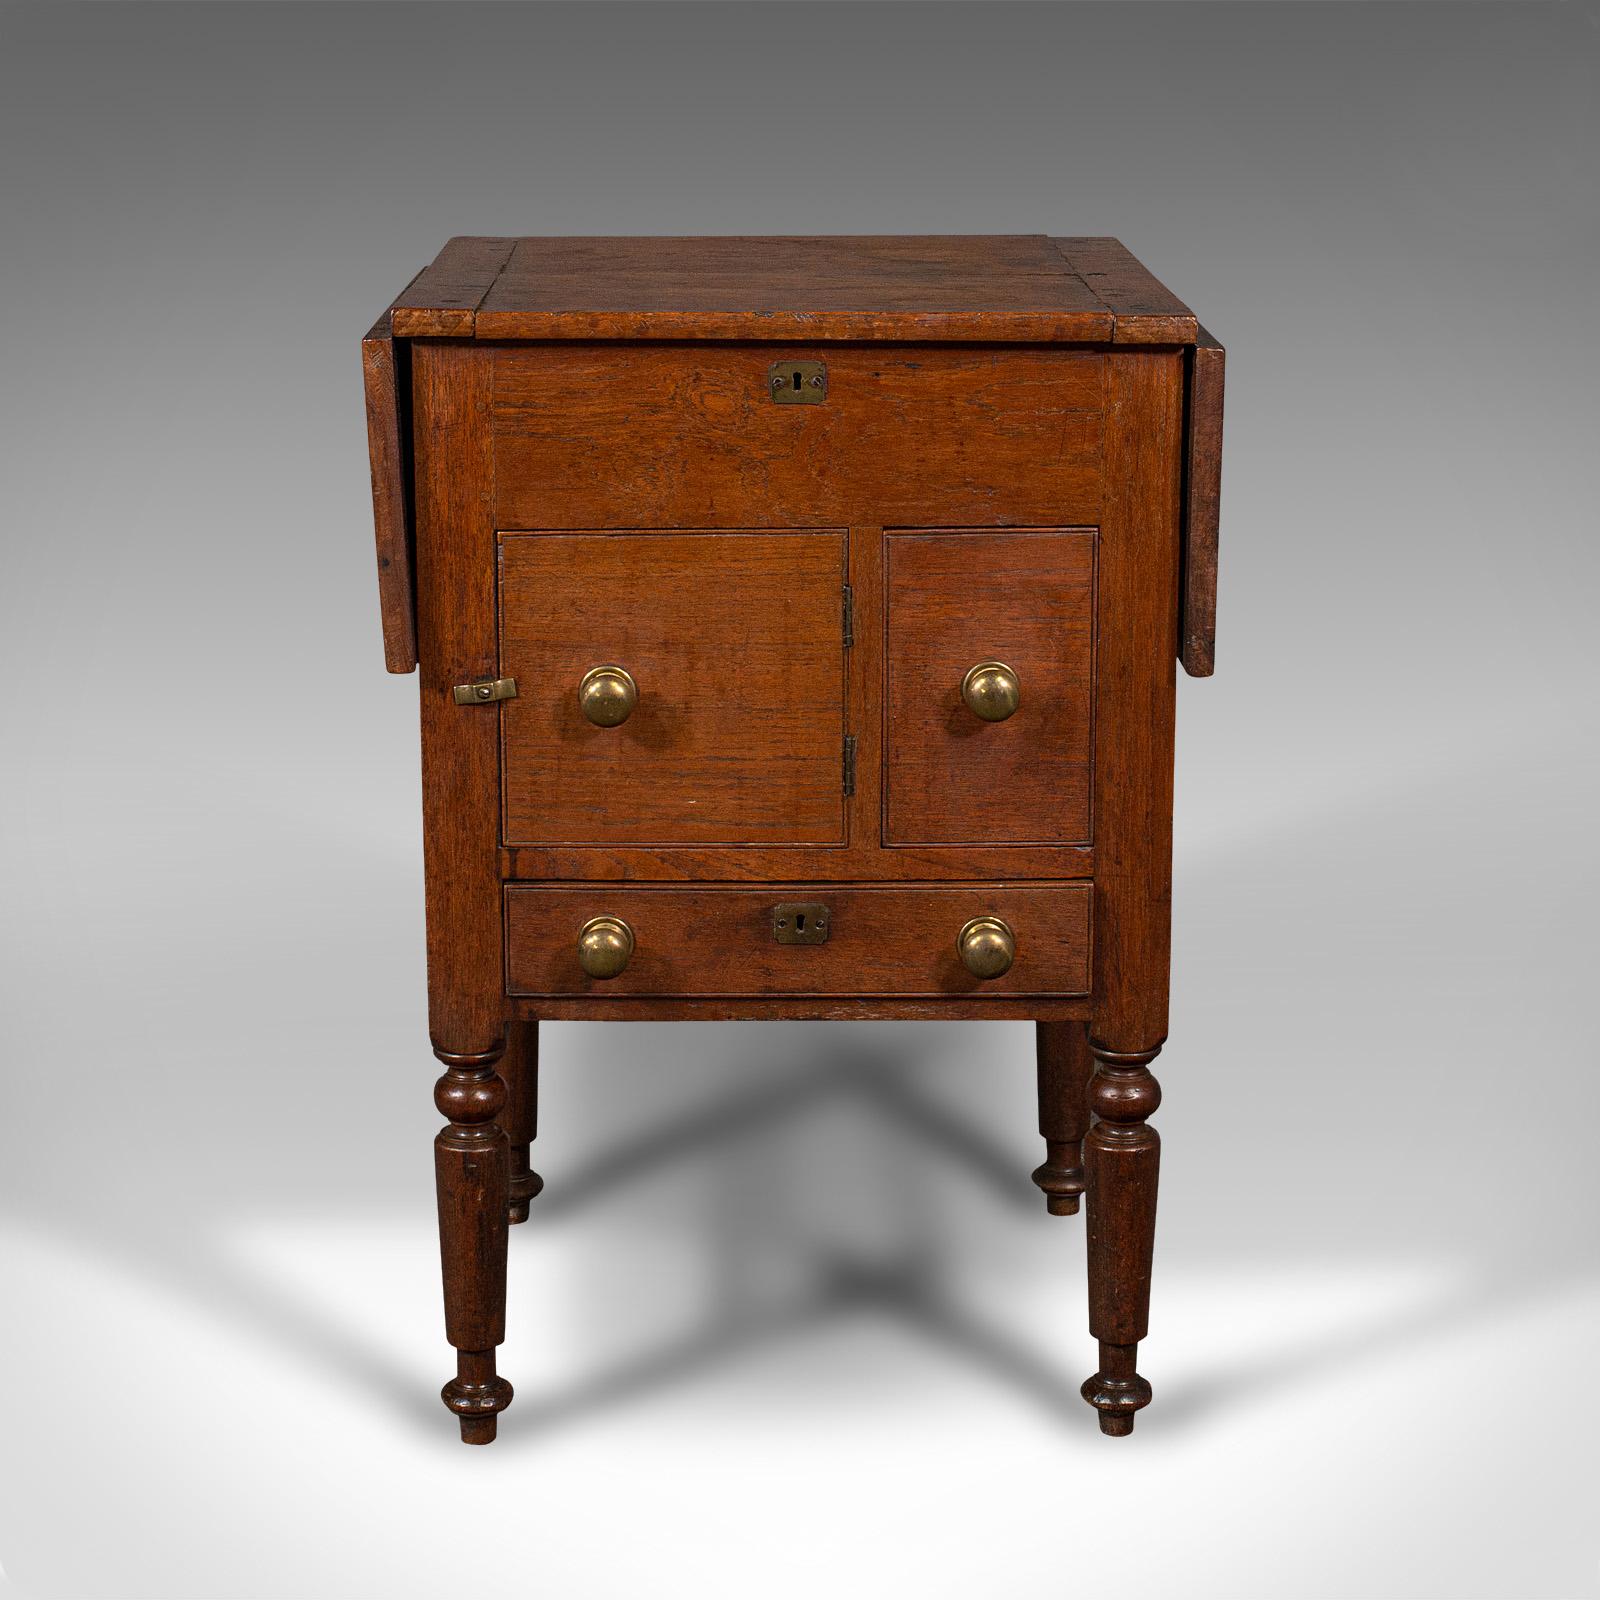 British Antique Ship's Wash Stand, English, Drop Flap Nightstand, Victorian, Circa 1850 For Sale